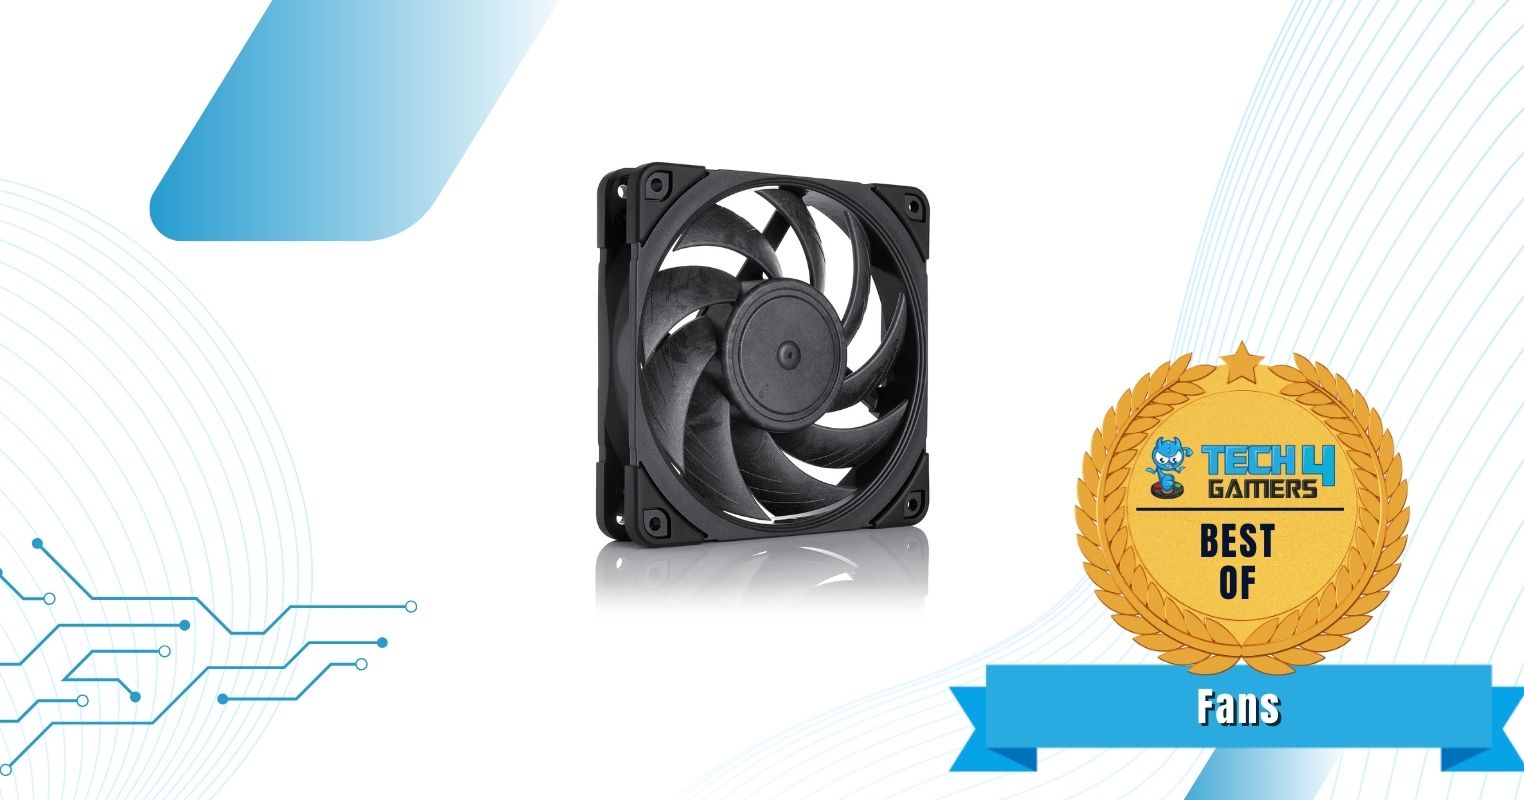 Noctua NF-A12x25 PWM Chromax Black - Best Fans For Water Cooling Radiator